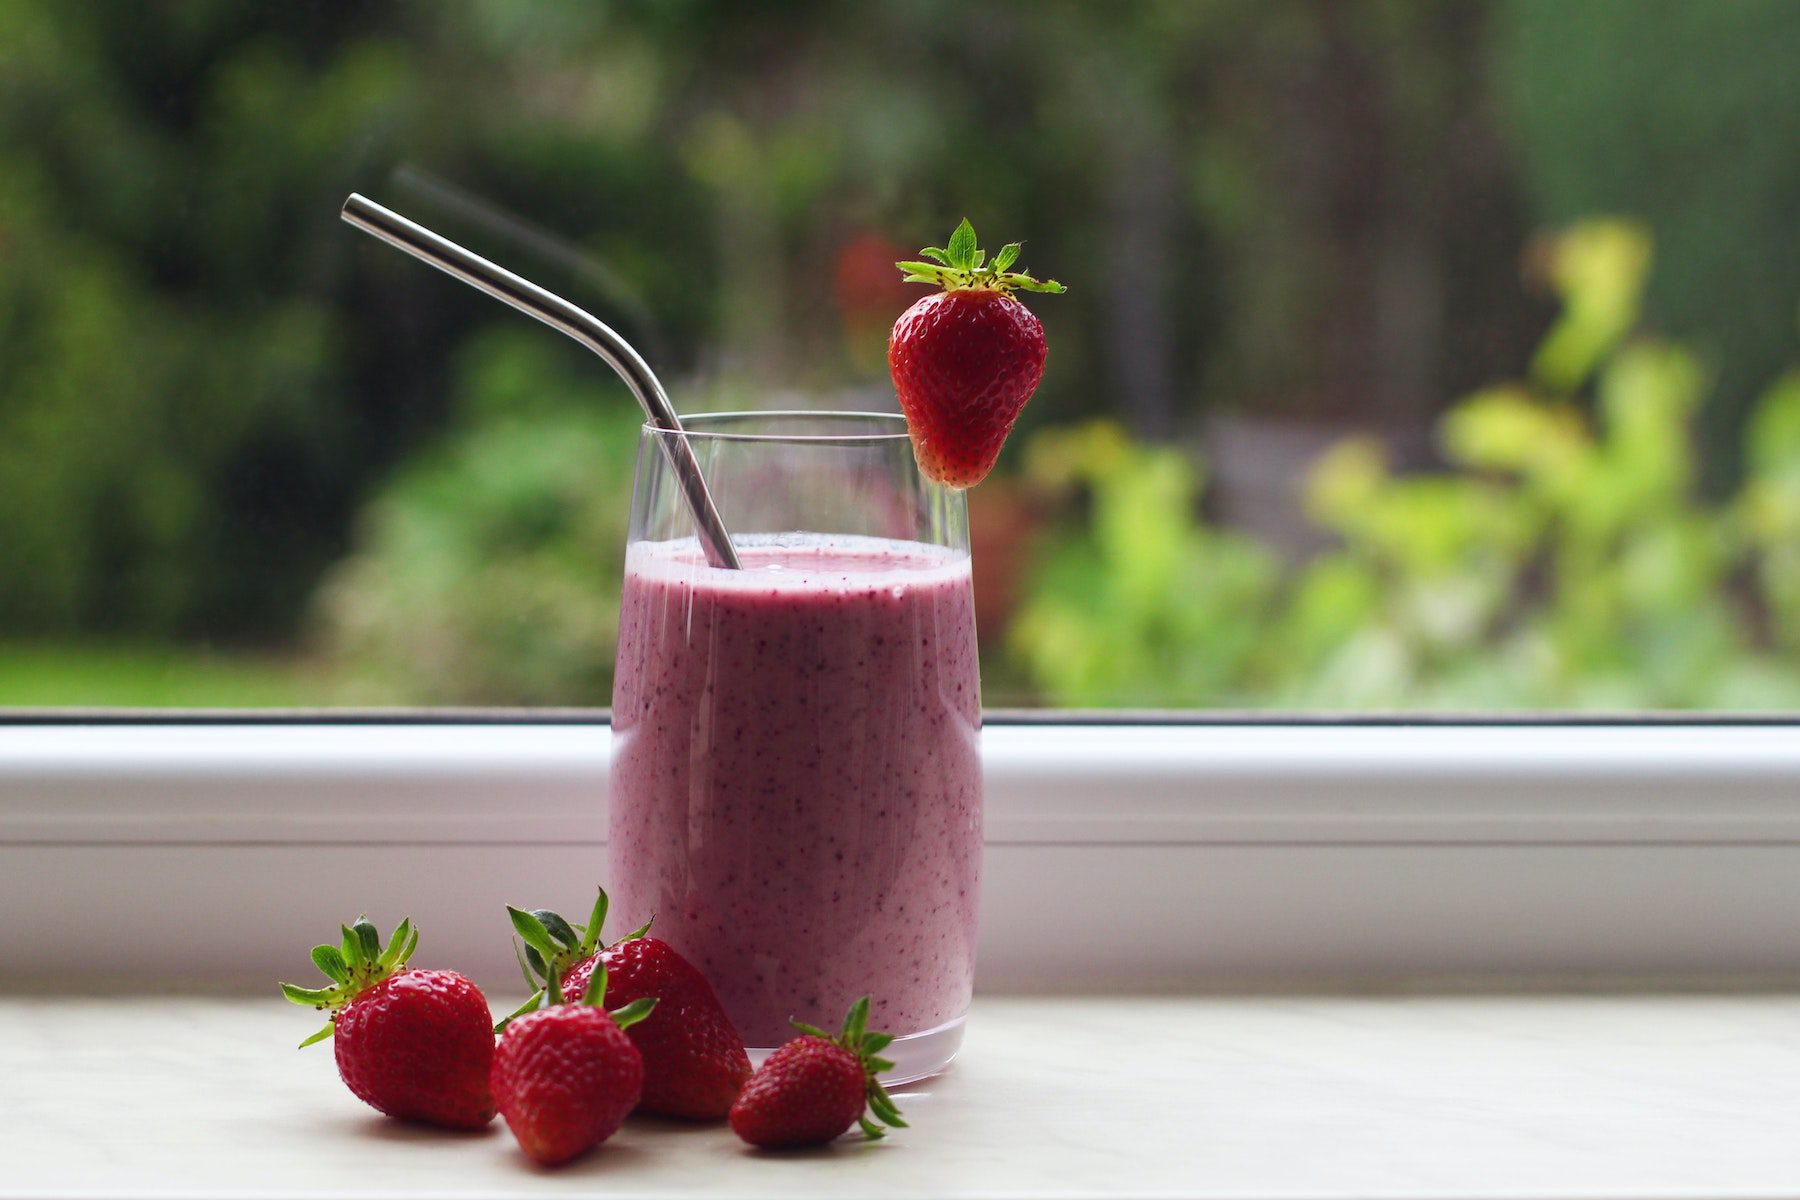 Strawberry smoothie with berries on a windowsill.